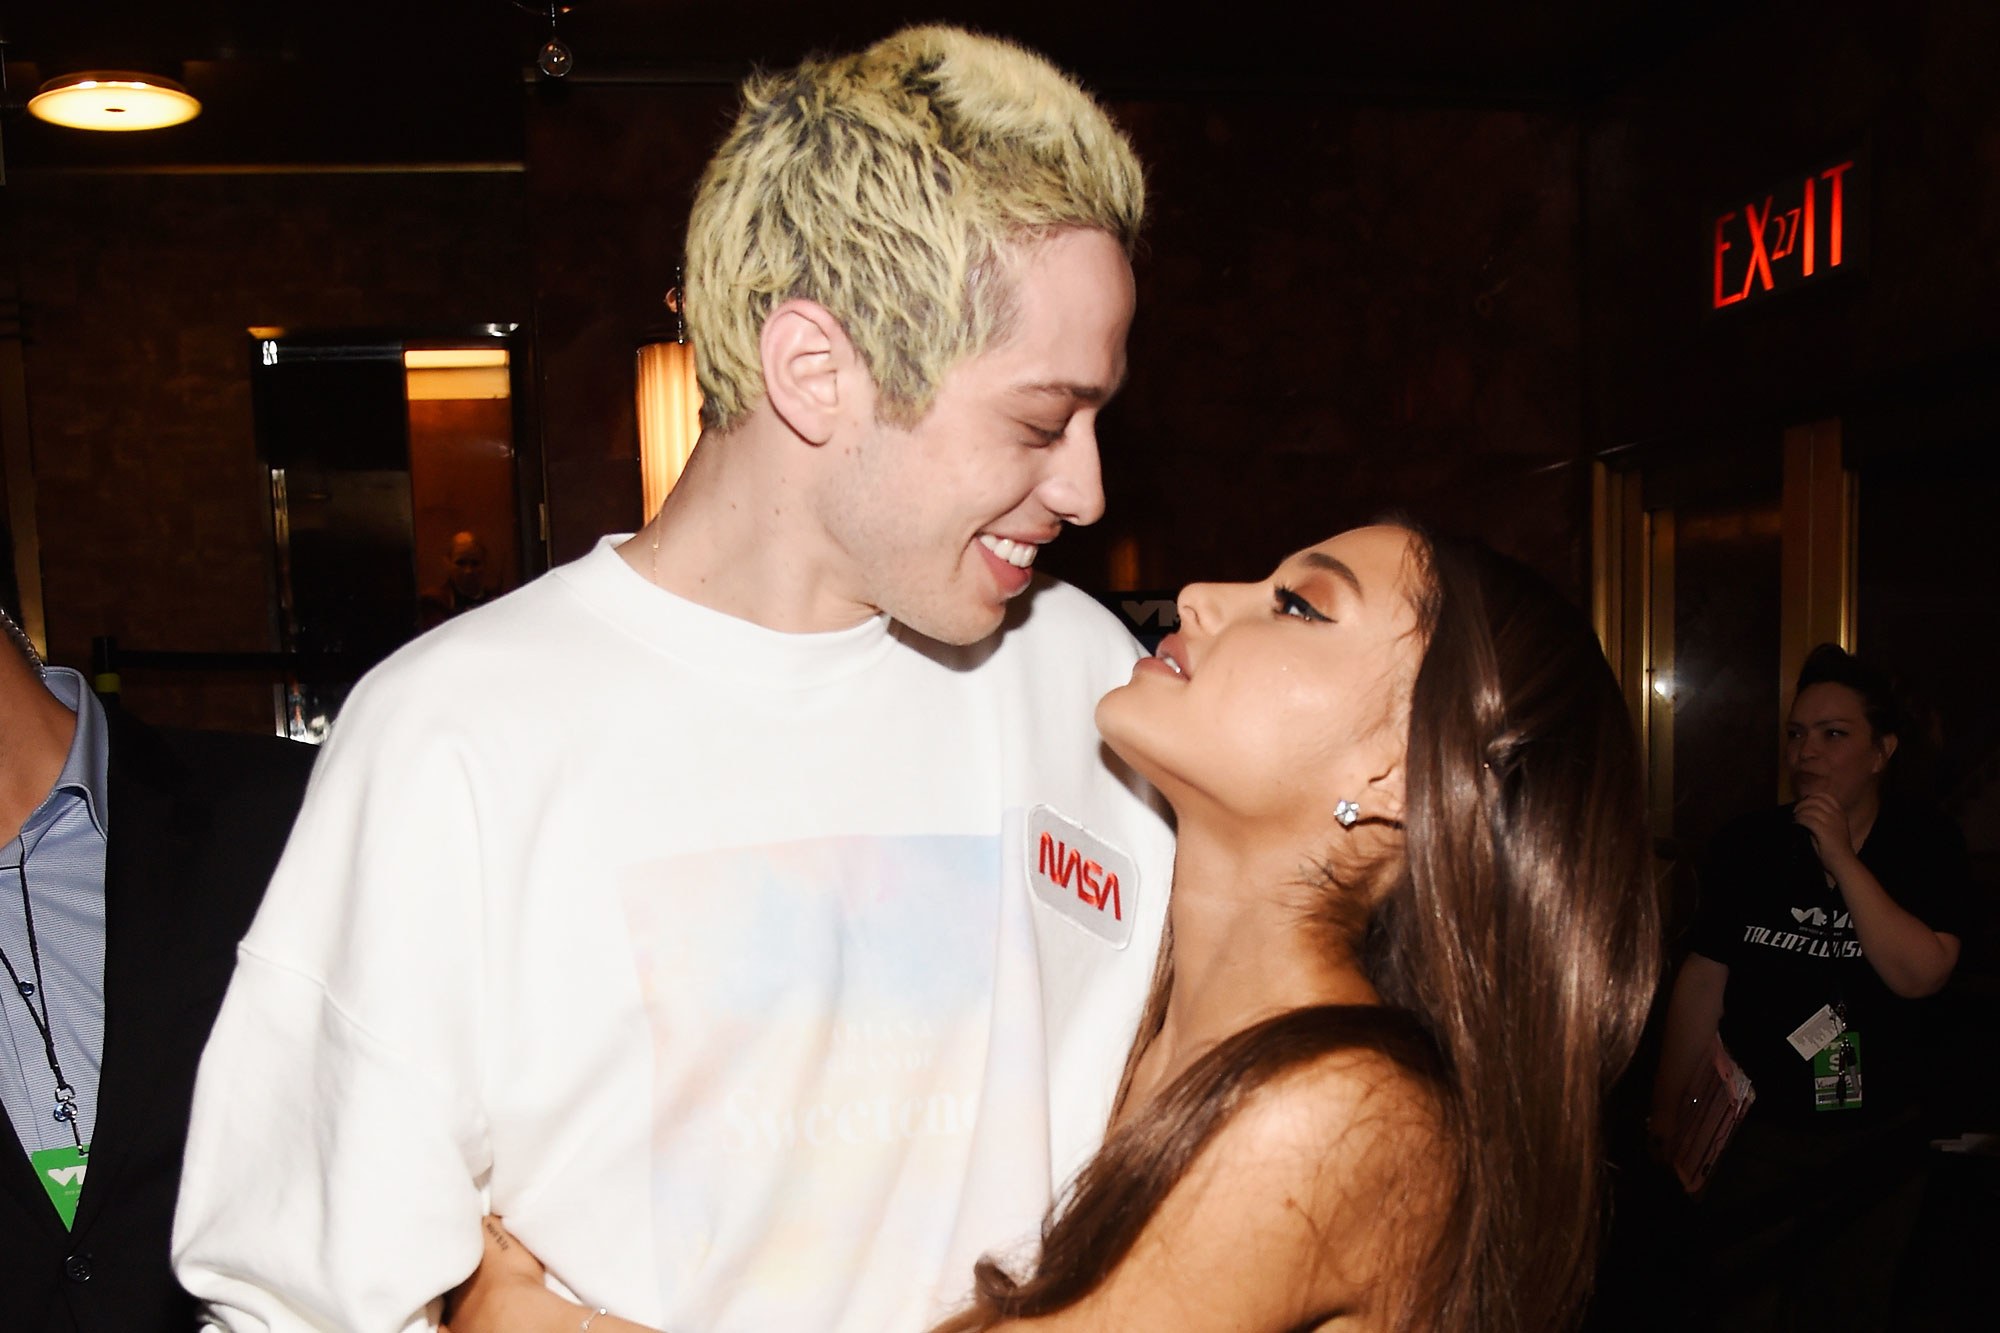 Pete Davidson Exchanged Ariana Grande’s contraception pills With Tic Tacs (He Jokes)